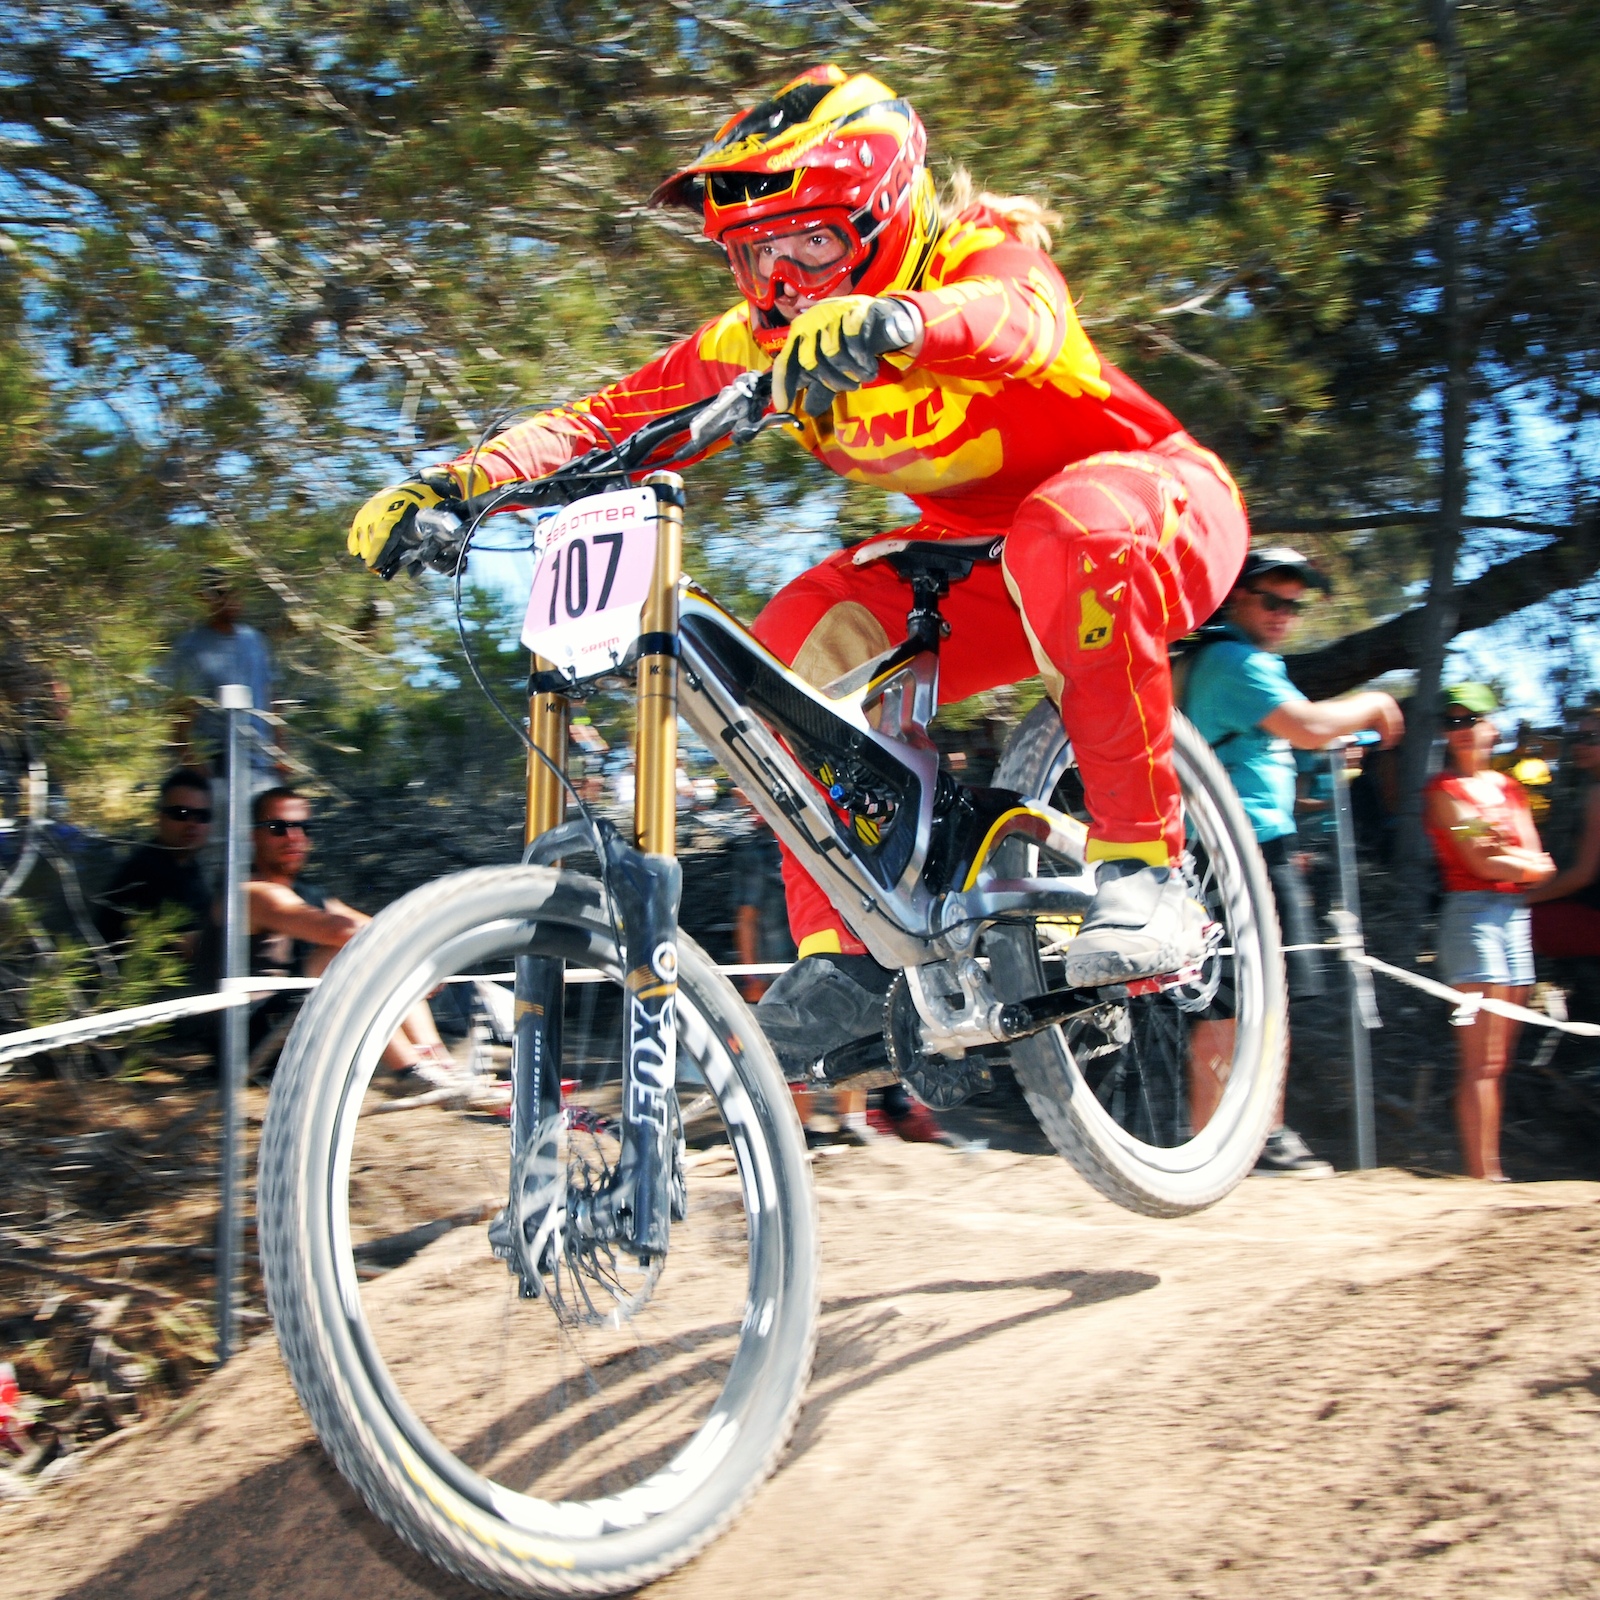 Racing the Pro Women's DH at Sea Otter.